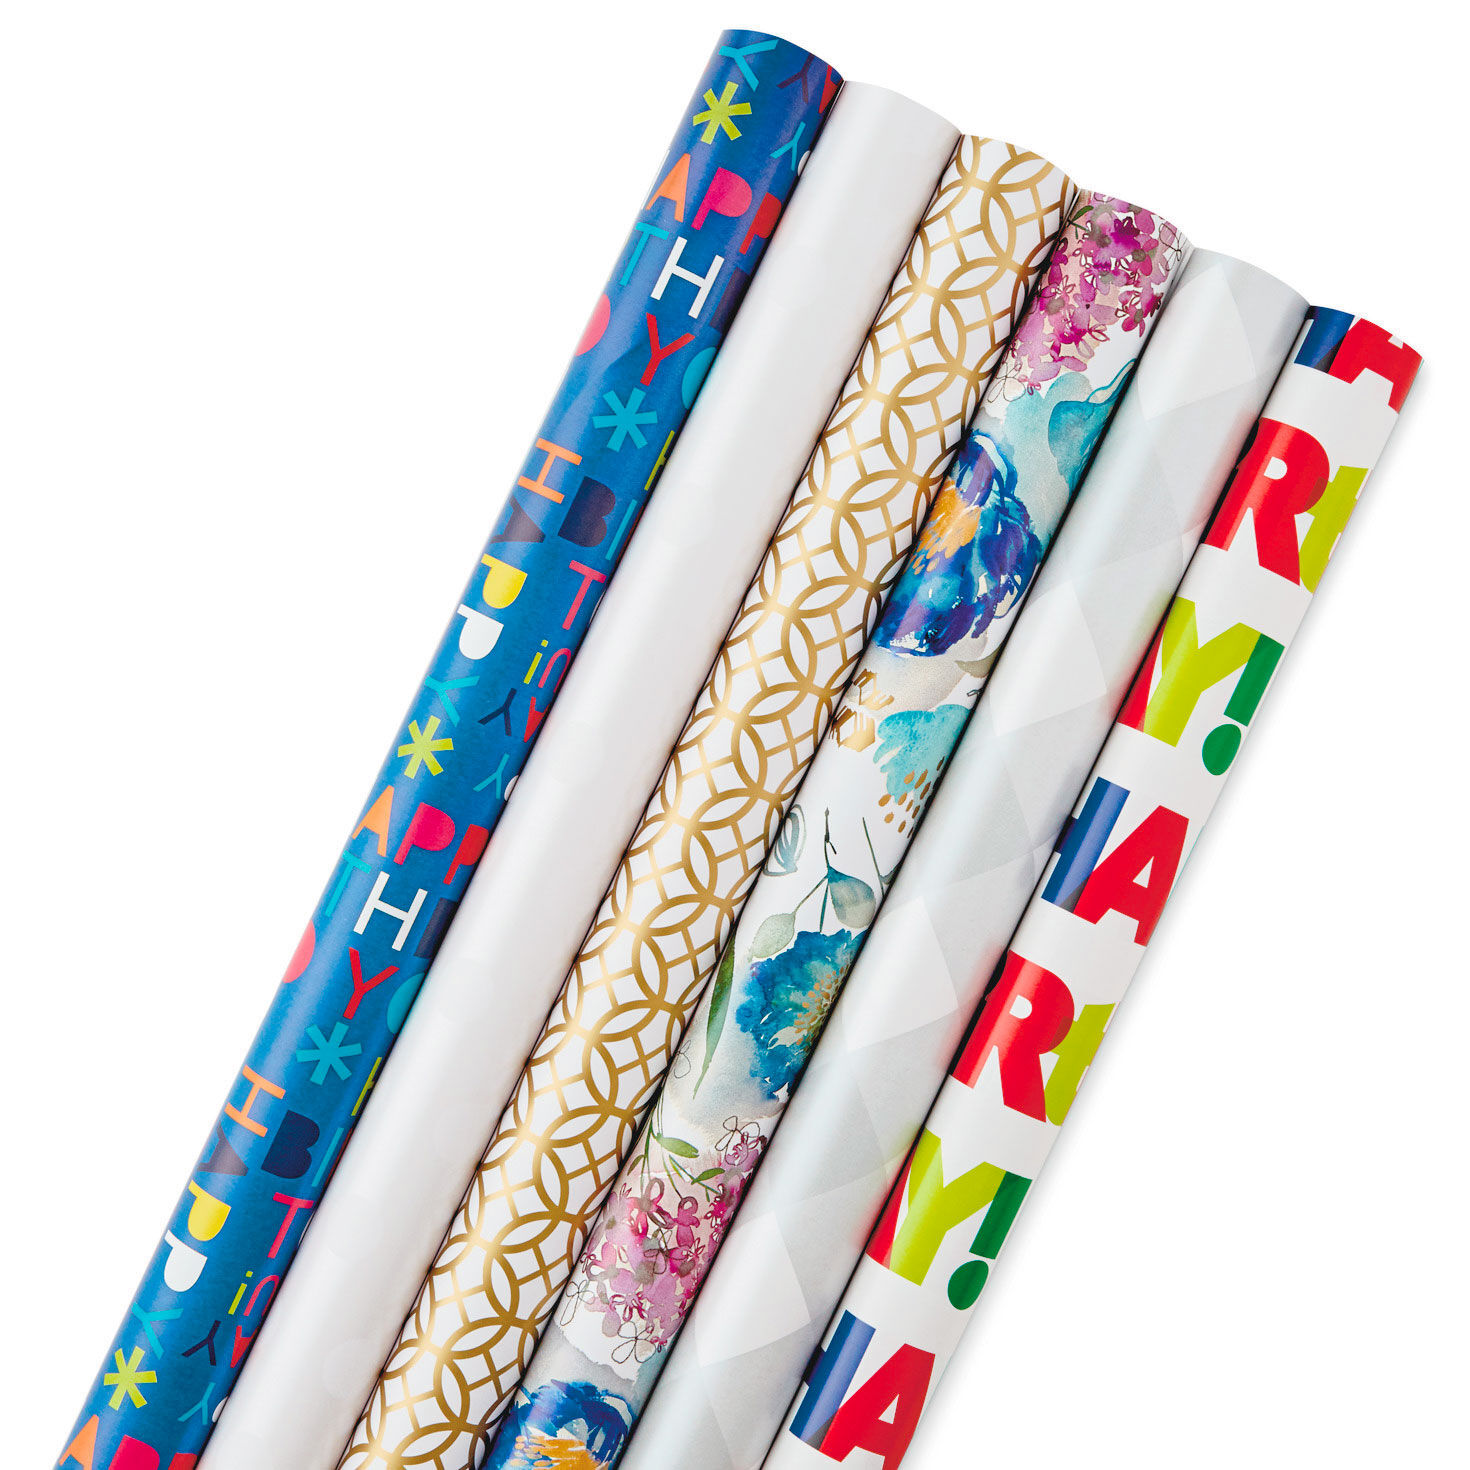 12 Sheets of All Occasion Wrapping Paper & Gift Tags